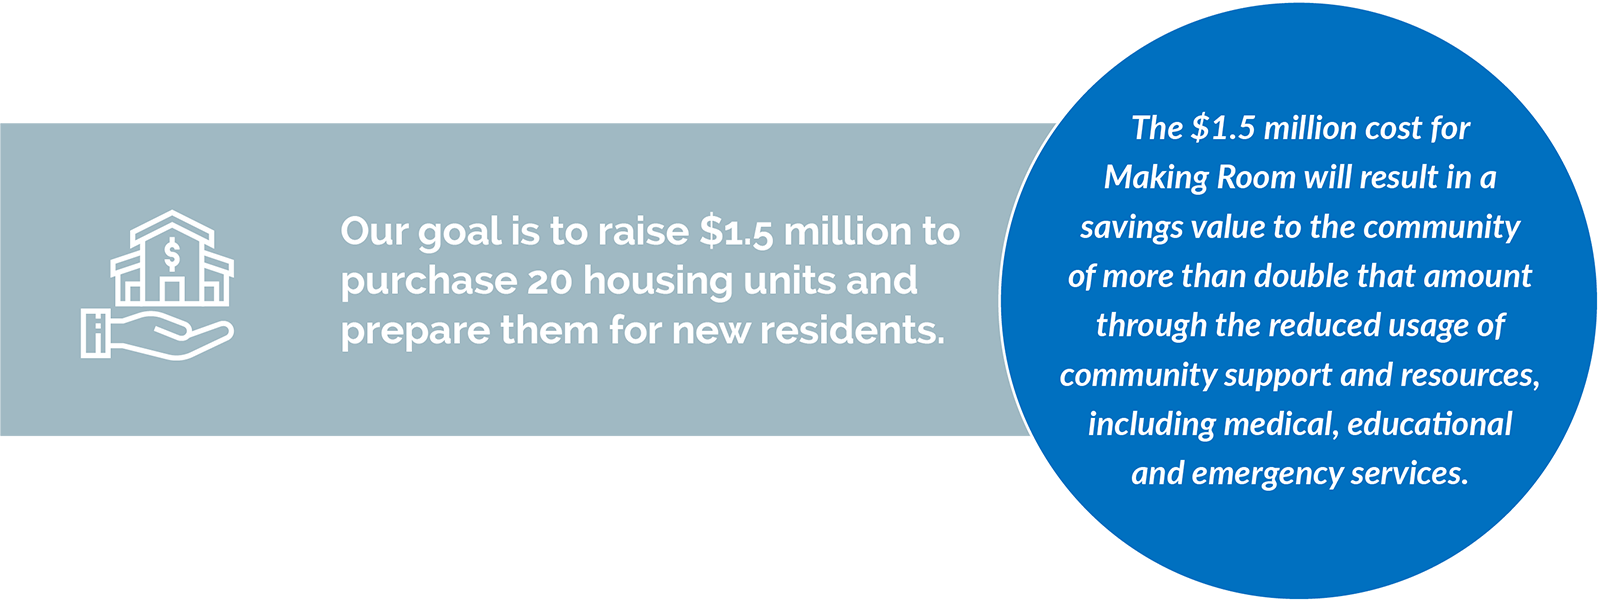 Our goal is to raise $1.5 million to purchase 20 housing units and prepare them for new residents. The $1.5 million cost for Making Room will result in a savings value to the community of more than double that amount through the reduced usage of community support and resources, including medical, educational and emergency services.